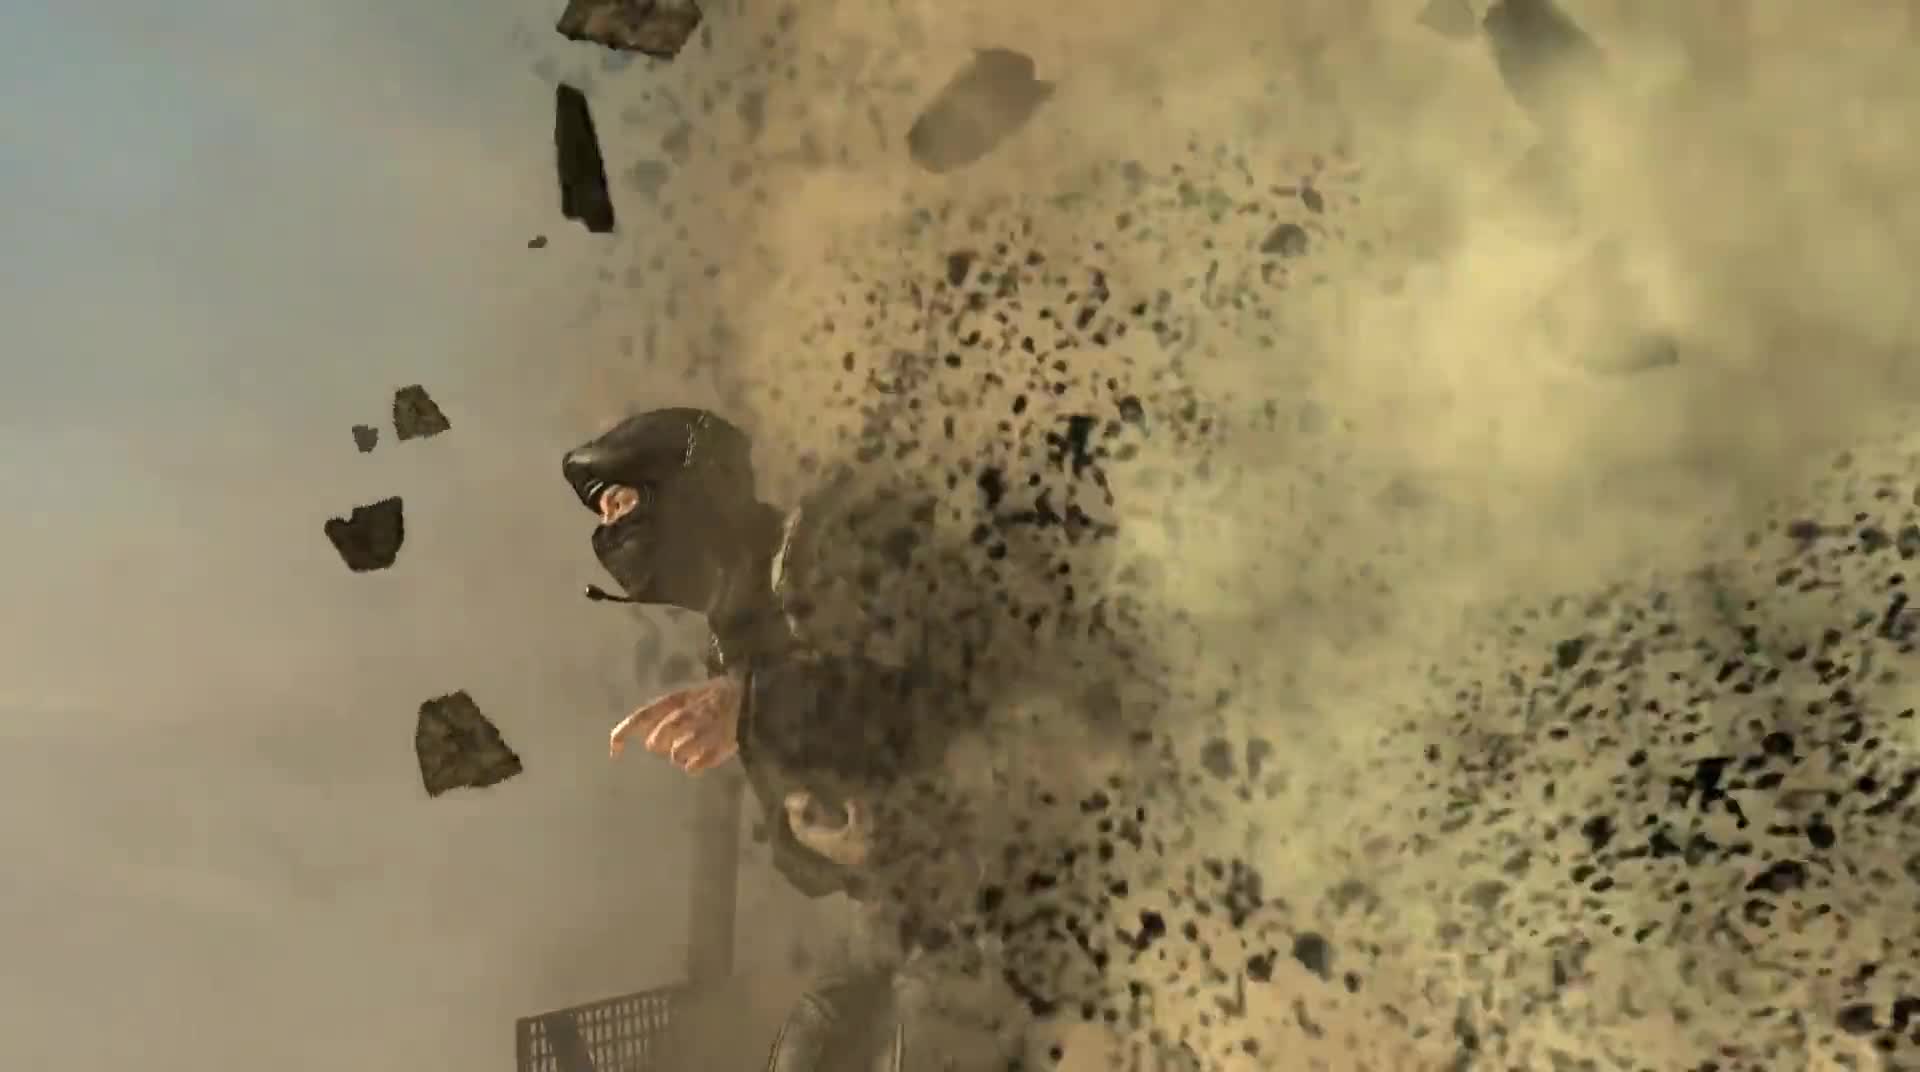 Call of Duty Online - 2014 New Promo Trailer